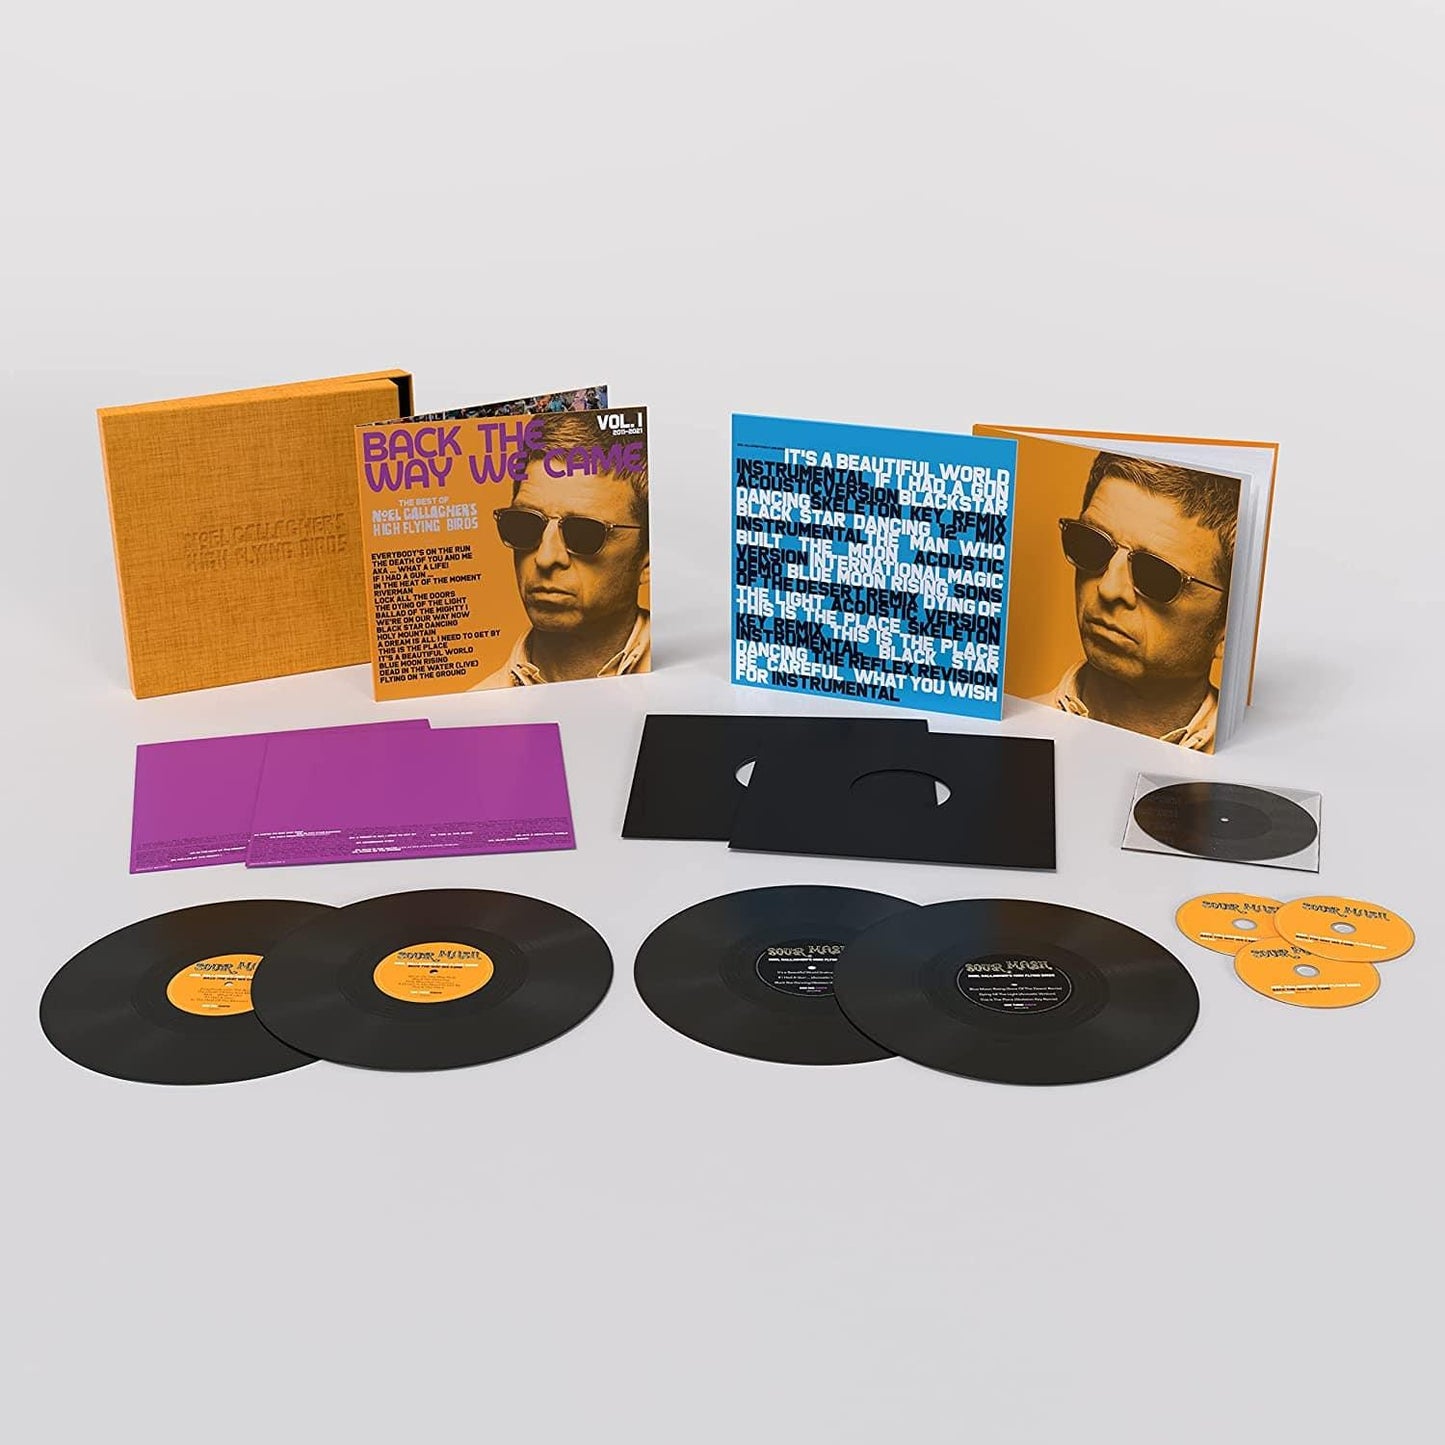 Noel Gallagher's High Flying Birds - Back The Way We Came: Vol. 1 (2011 - 2021) (Oversize Item Split, Deluxe Edition, Boxed Set) - Joco Records